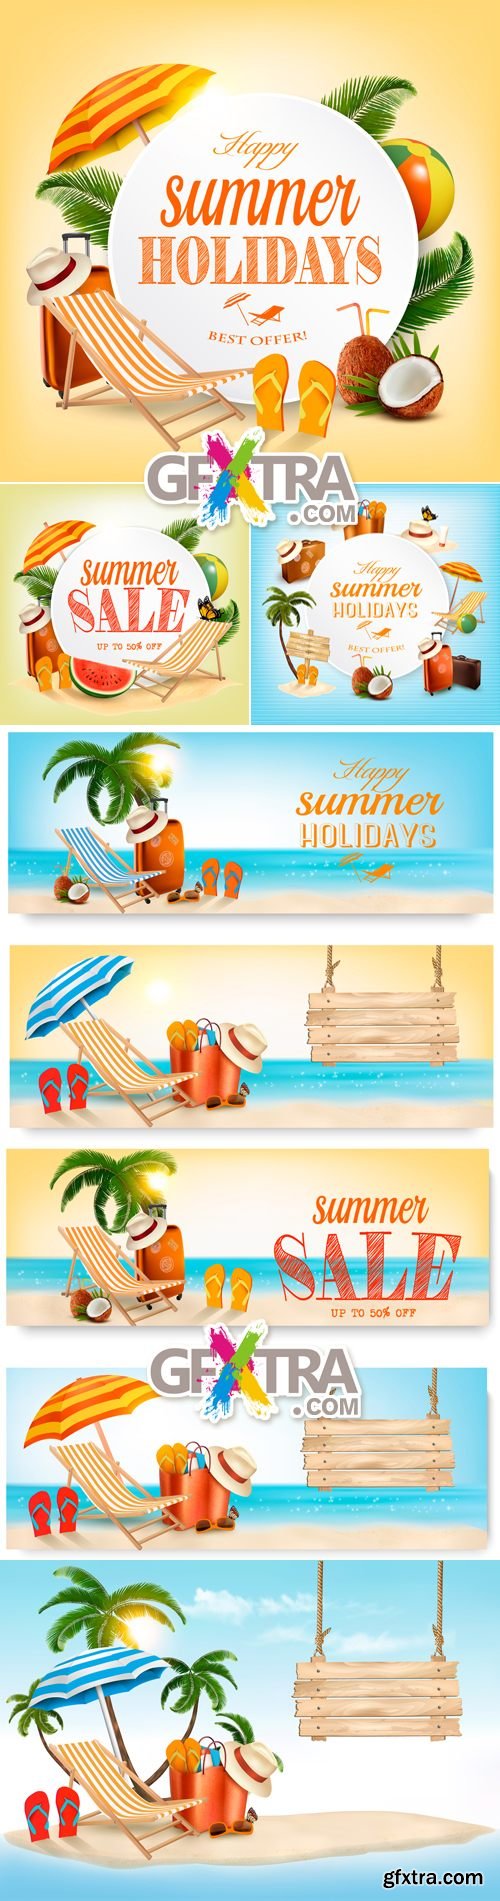 Summer Holidays Banners Vector 4